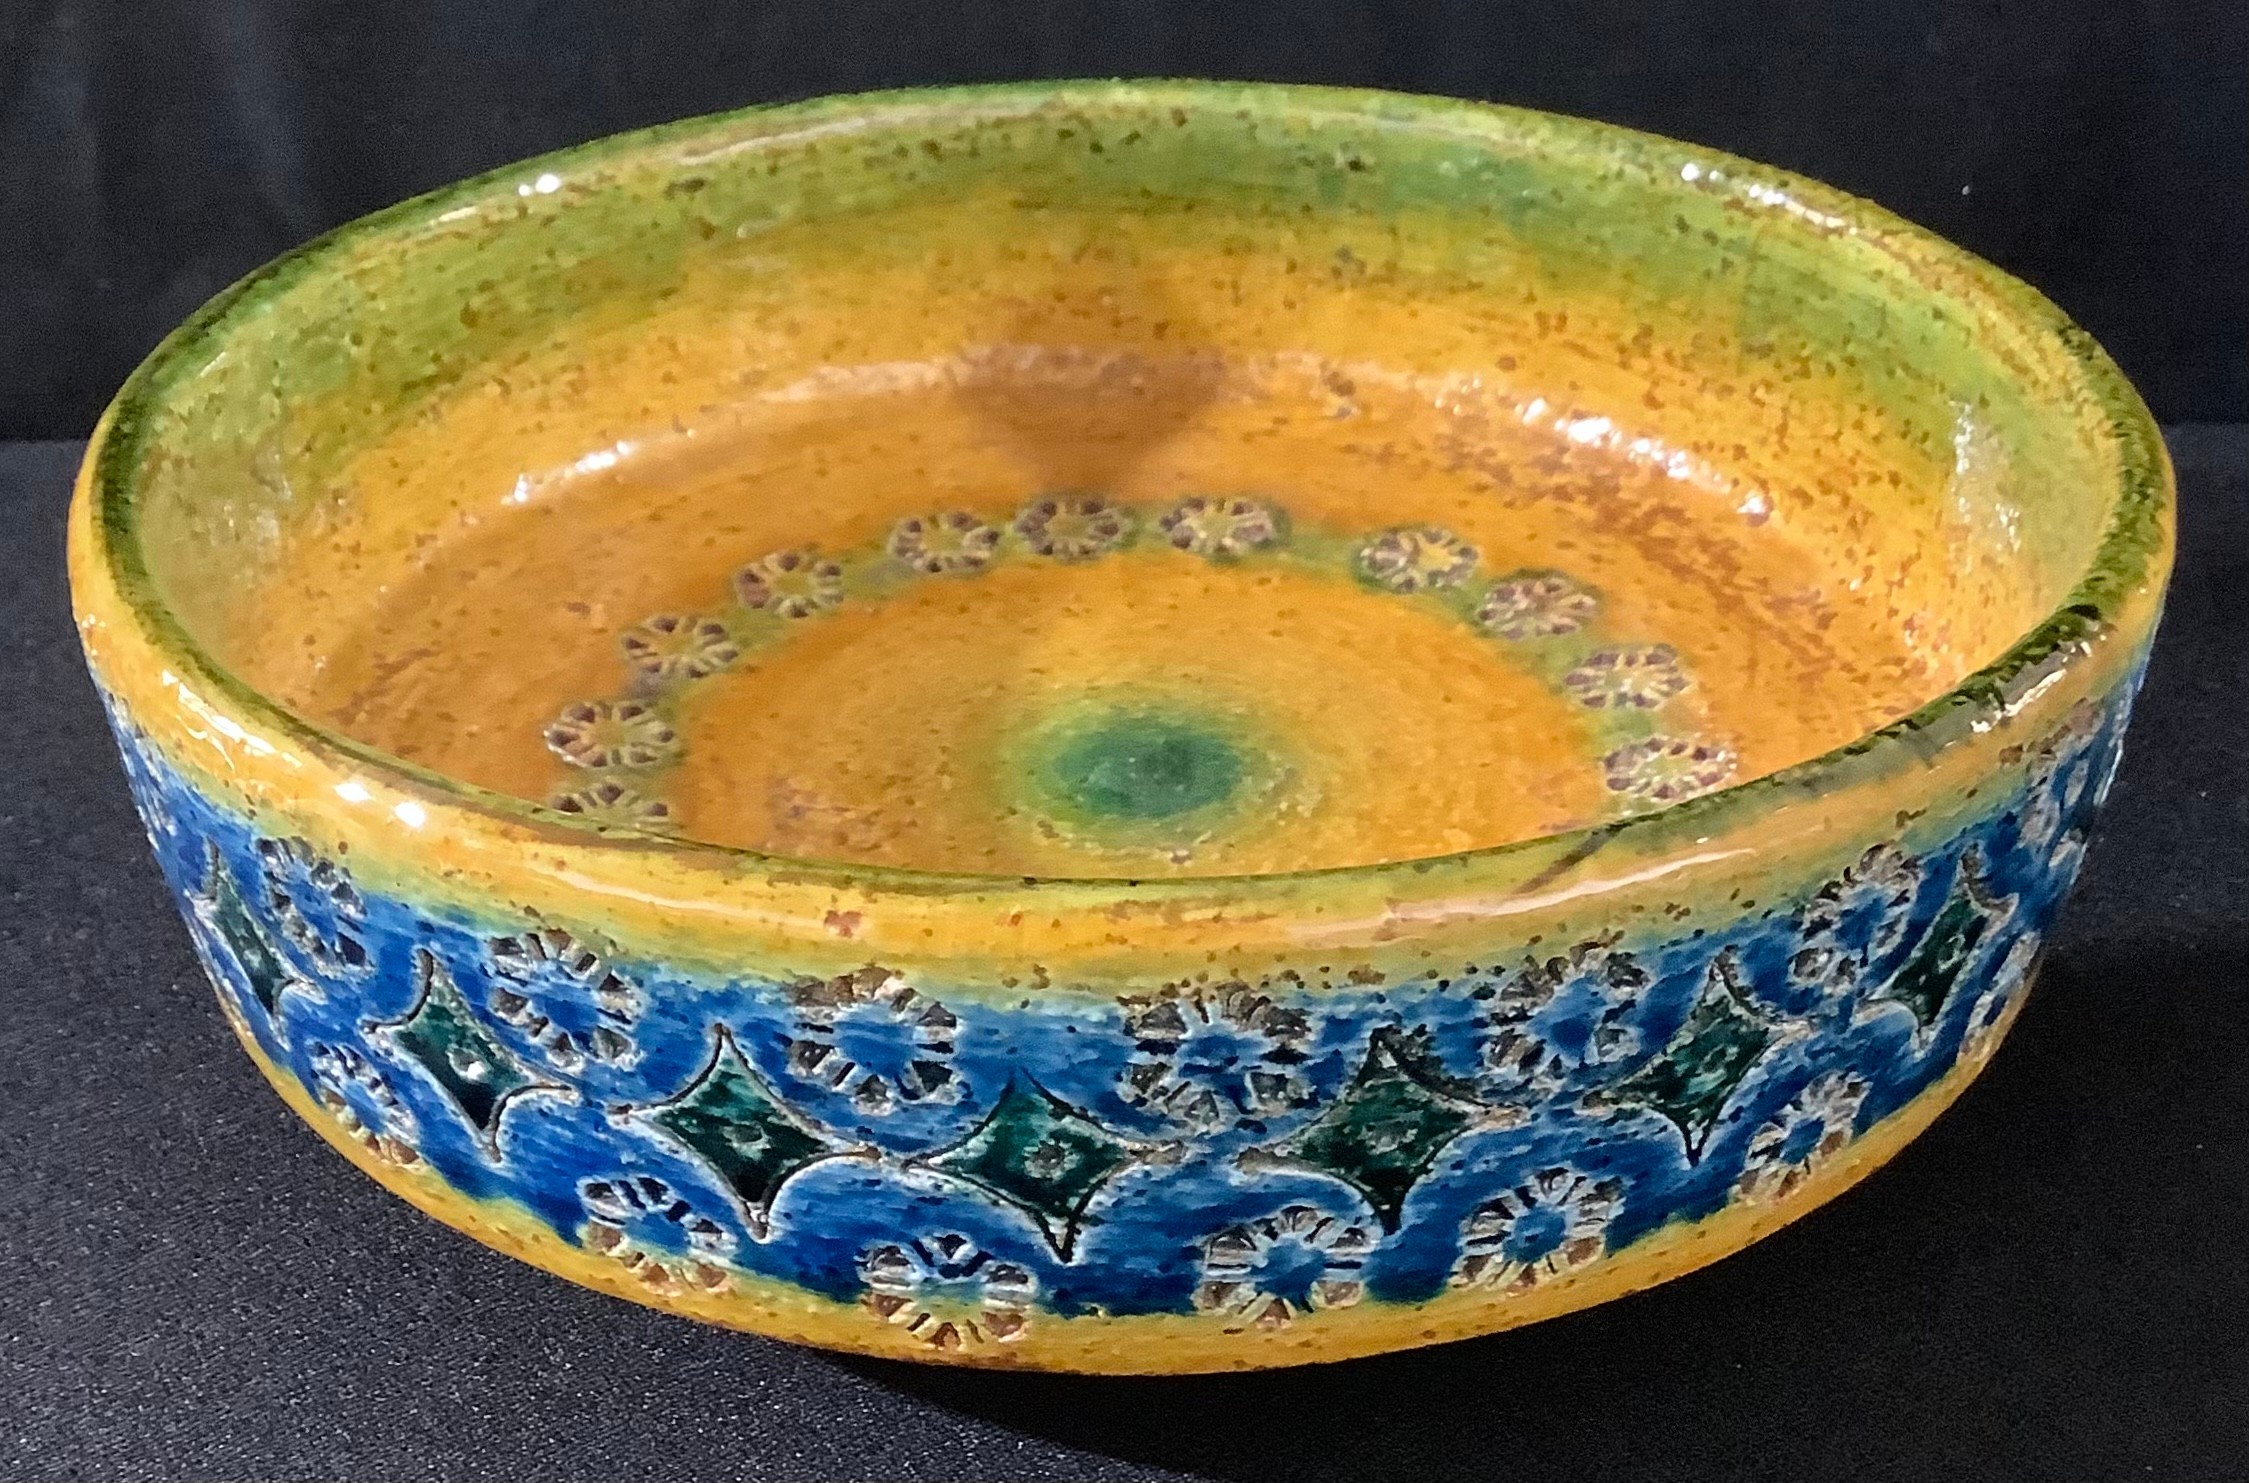 An Italian stoneware art pottery bowl by Nuovo Rinascimento, impressed and glazed in shades of